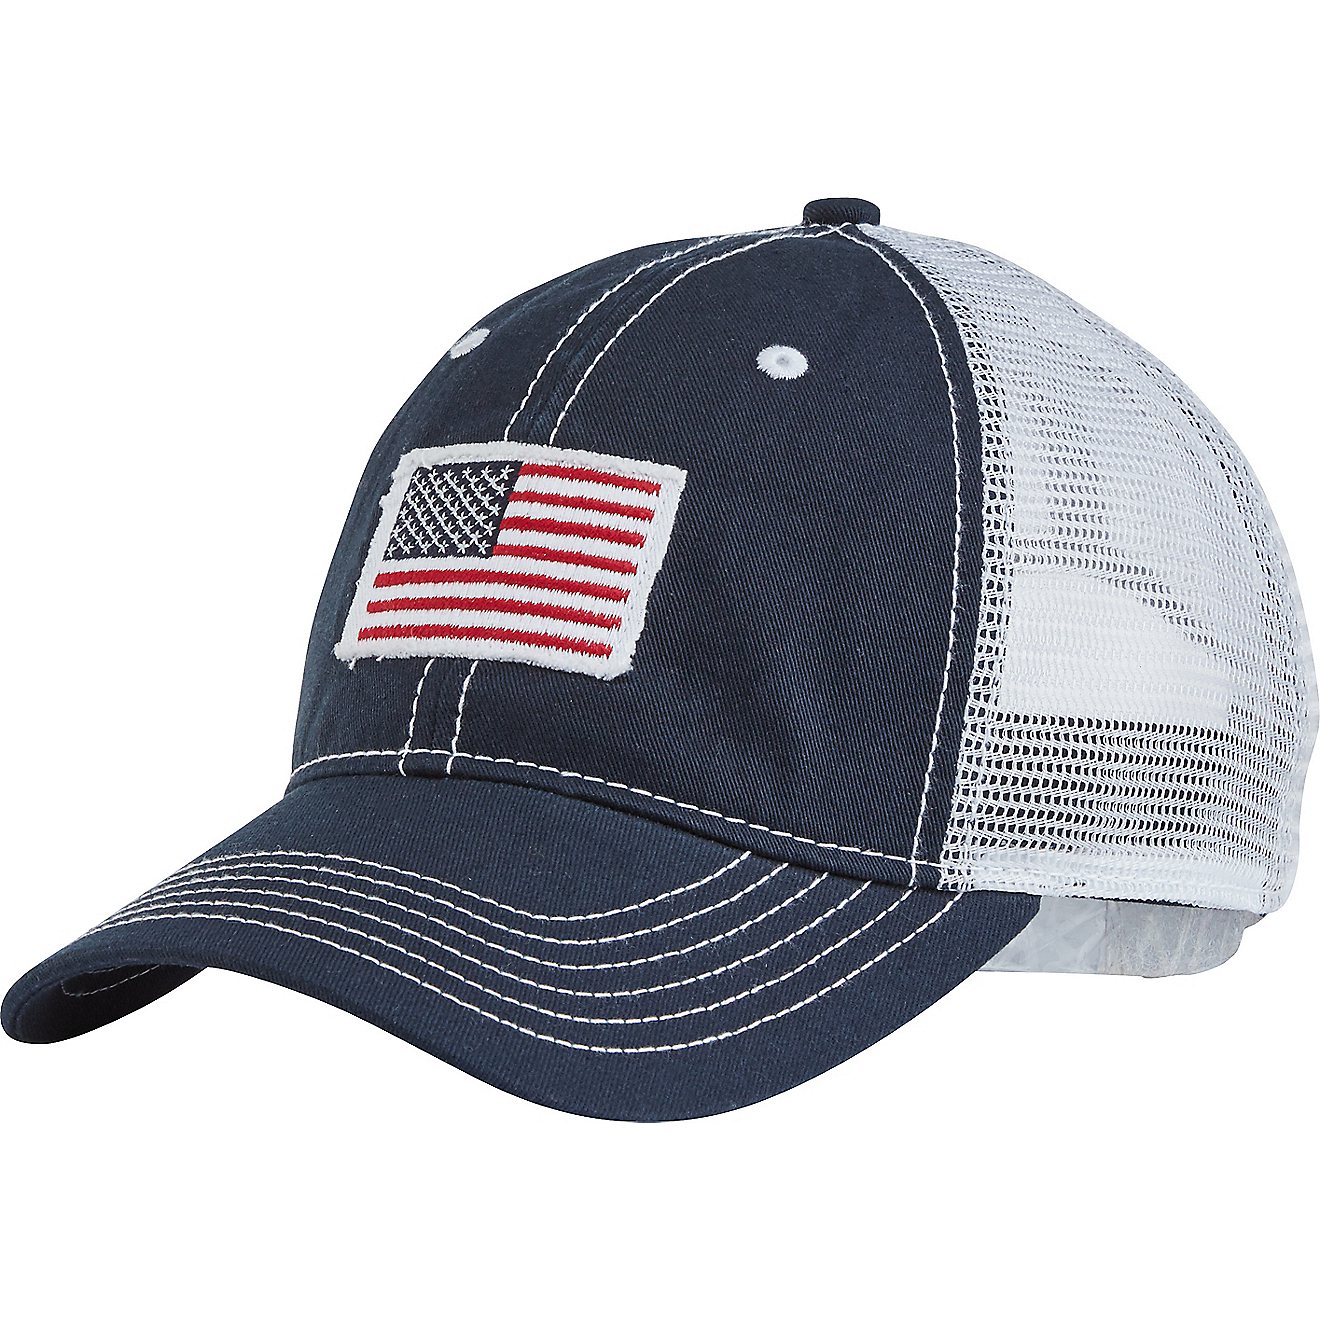 Academy Sports + Outdoors Men's American Flag Trucker Hat                                                                        - view number 2